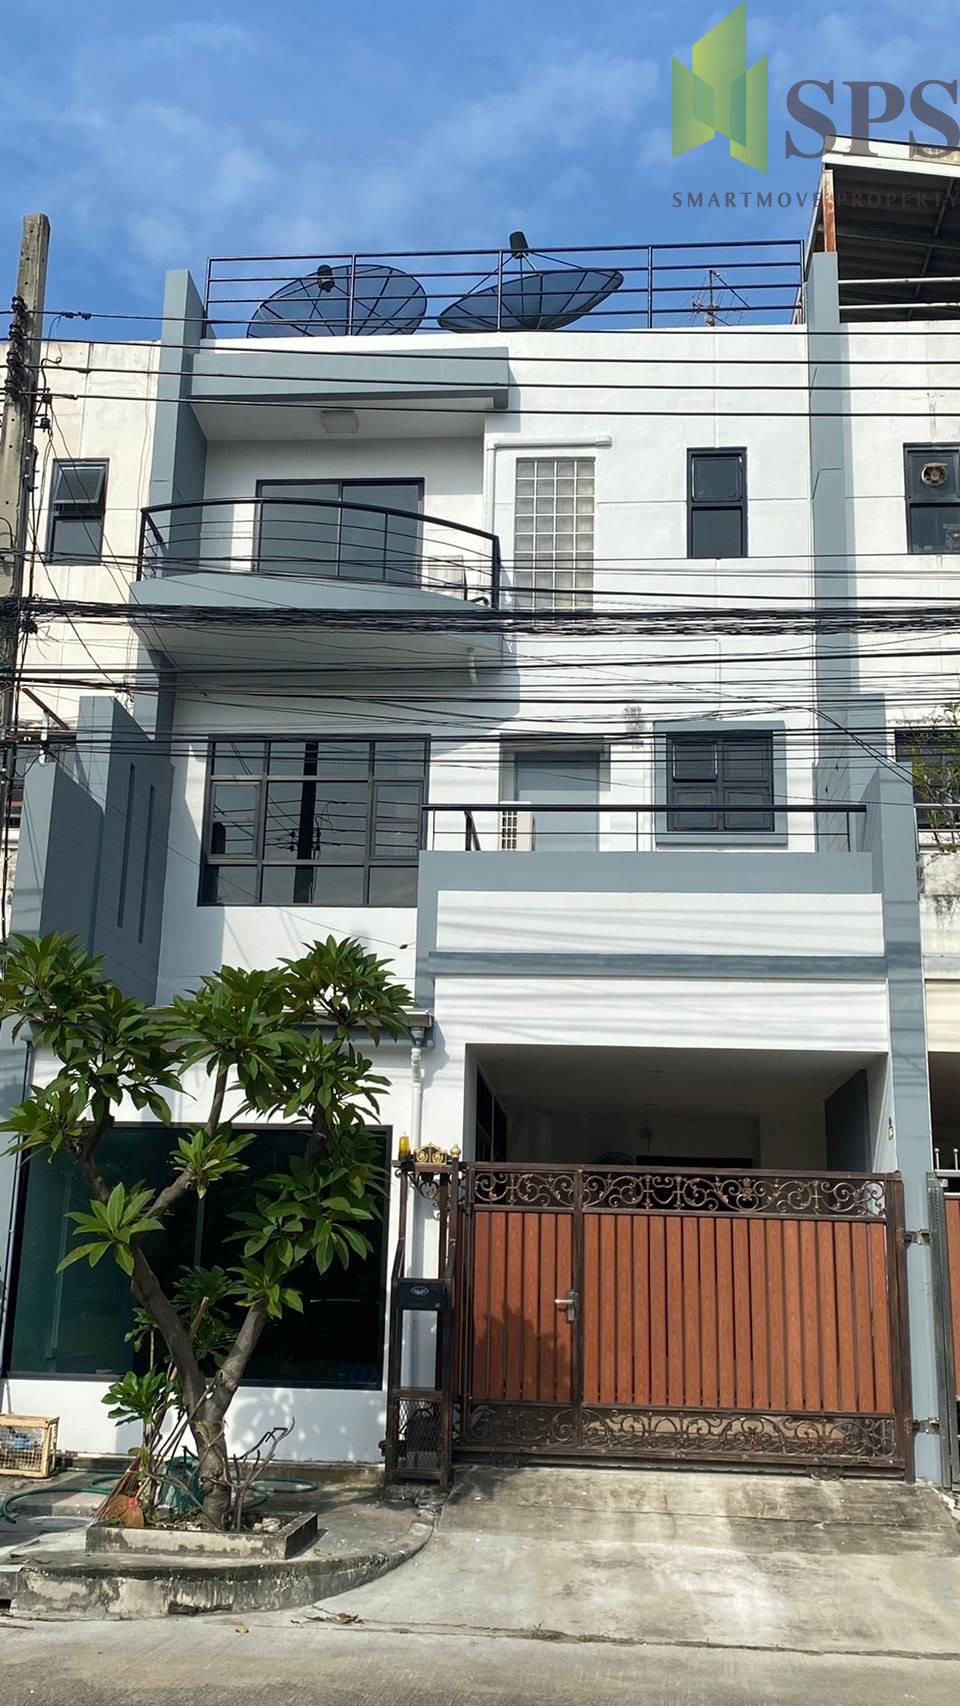 For Rent Newly renovated Home Office in Lasalle 77 (SPSP406)